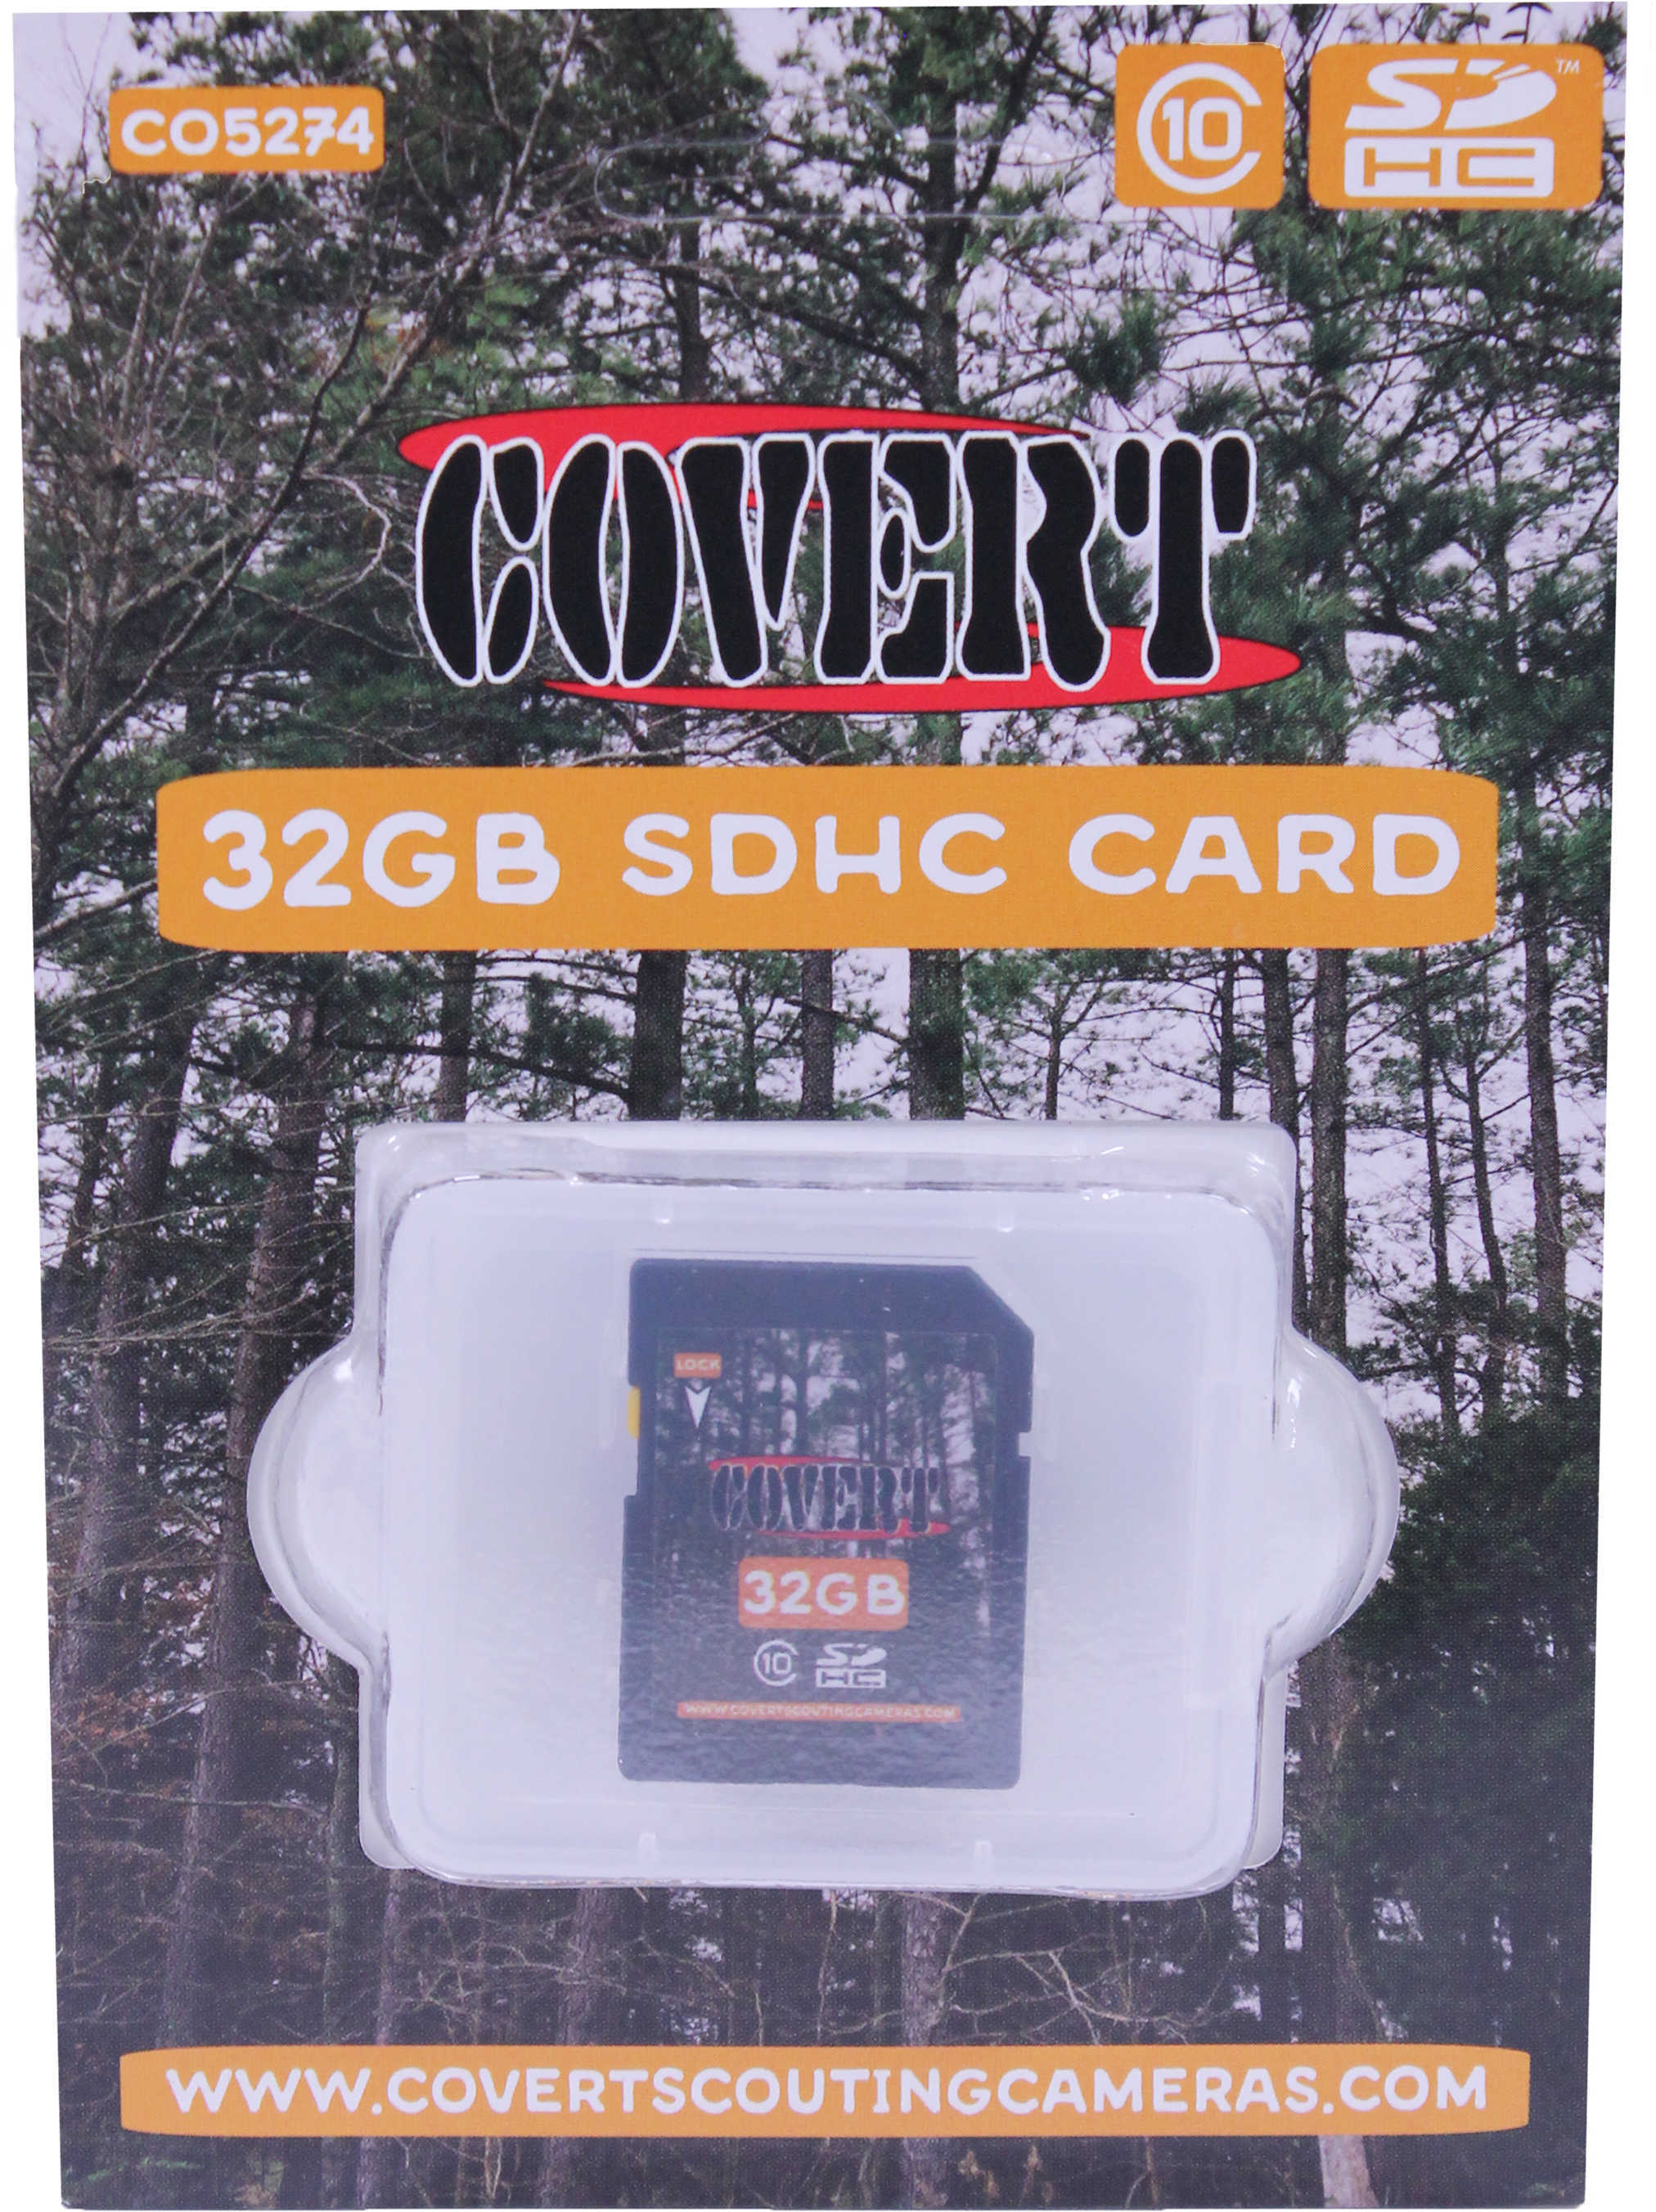 Covert Scouting Cameras SD Card 32GB, Class 10 Md: 5274